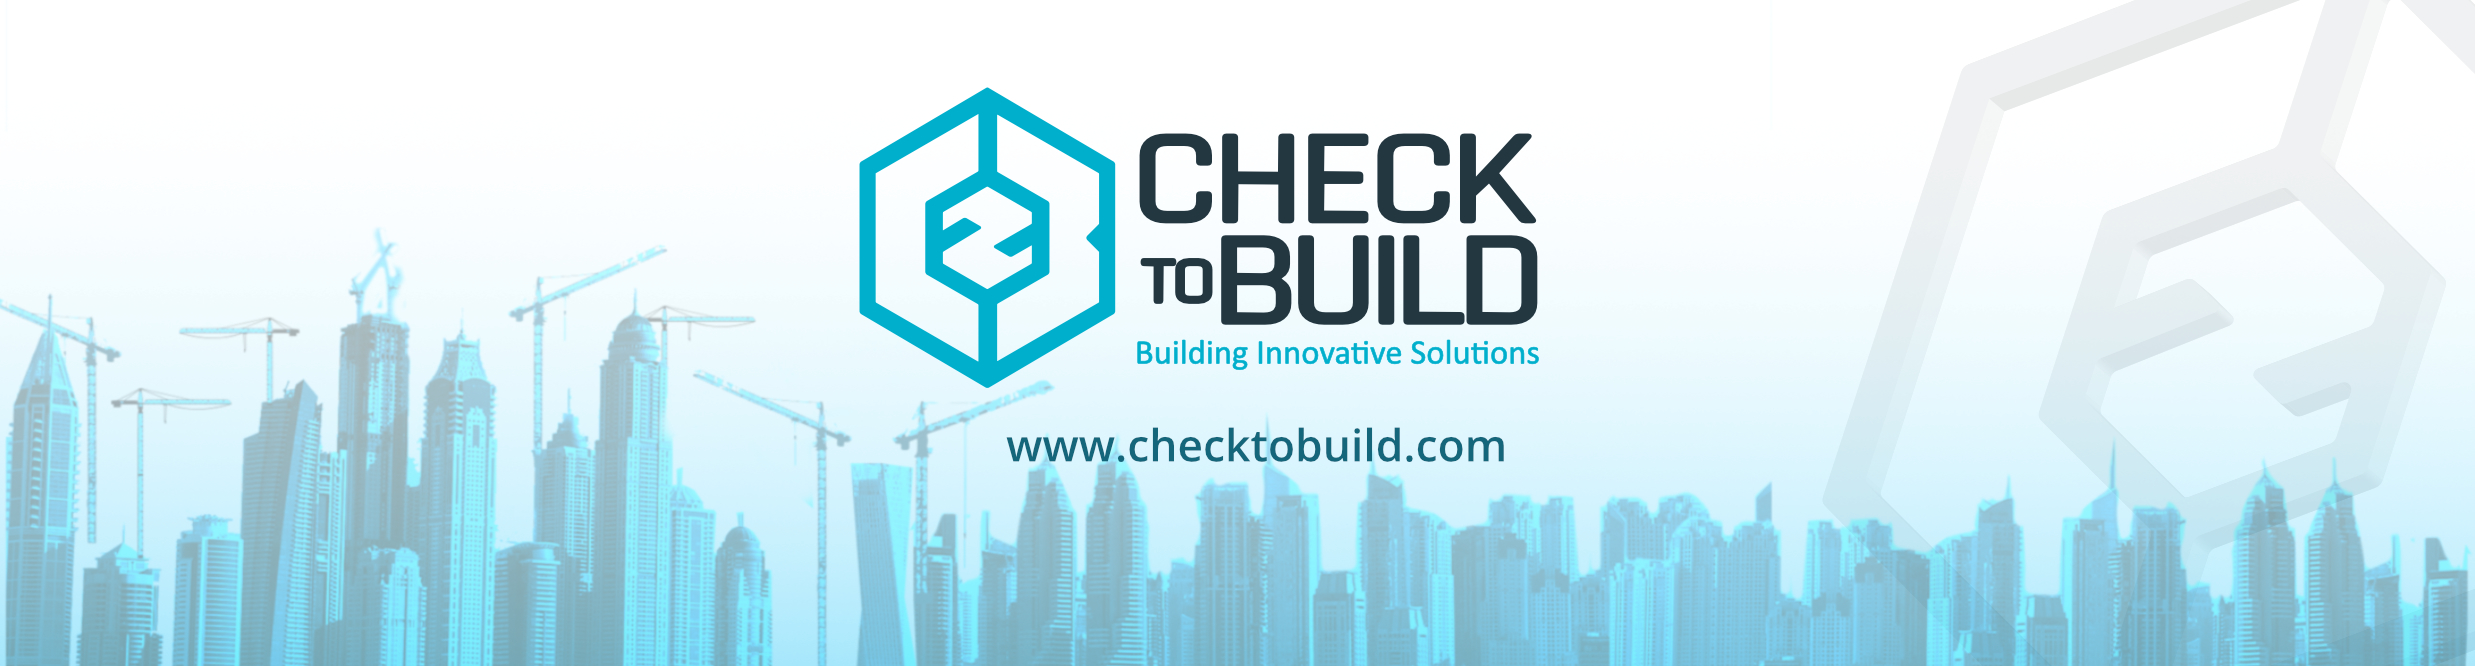 Check to build